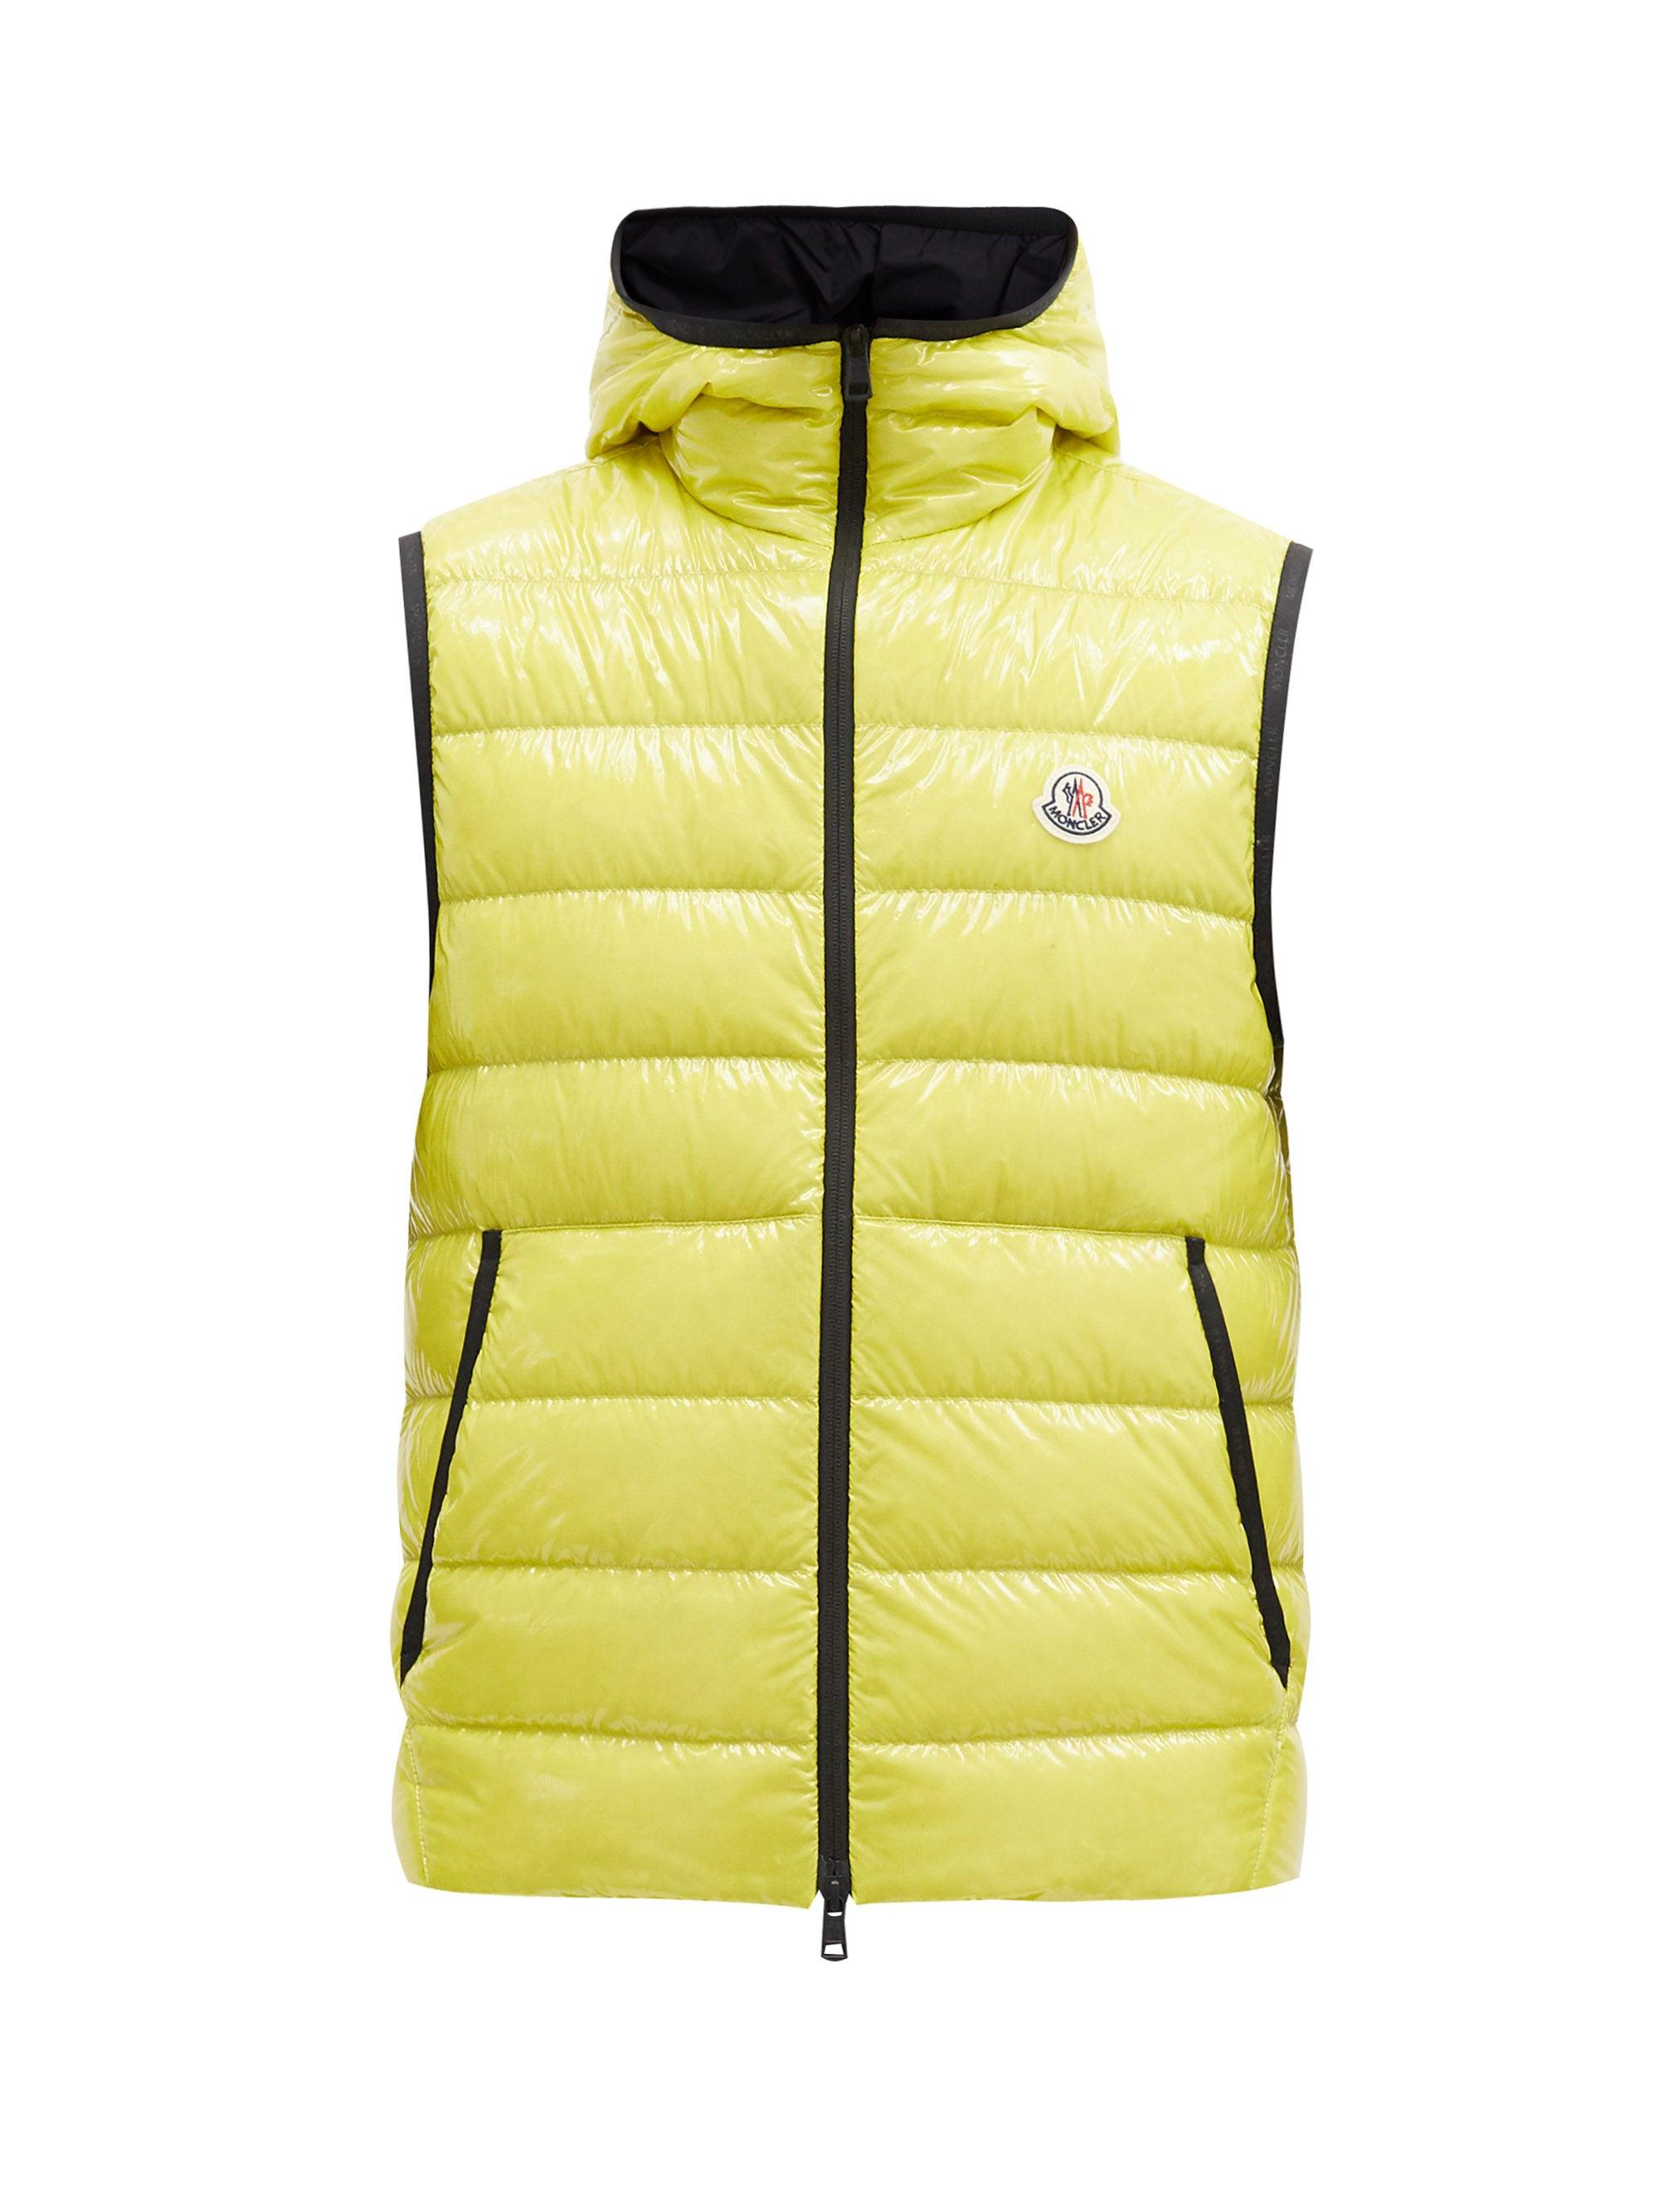 Moncler Denim Hooded Quilted Down Gilet in Yellow for Men - Lyst